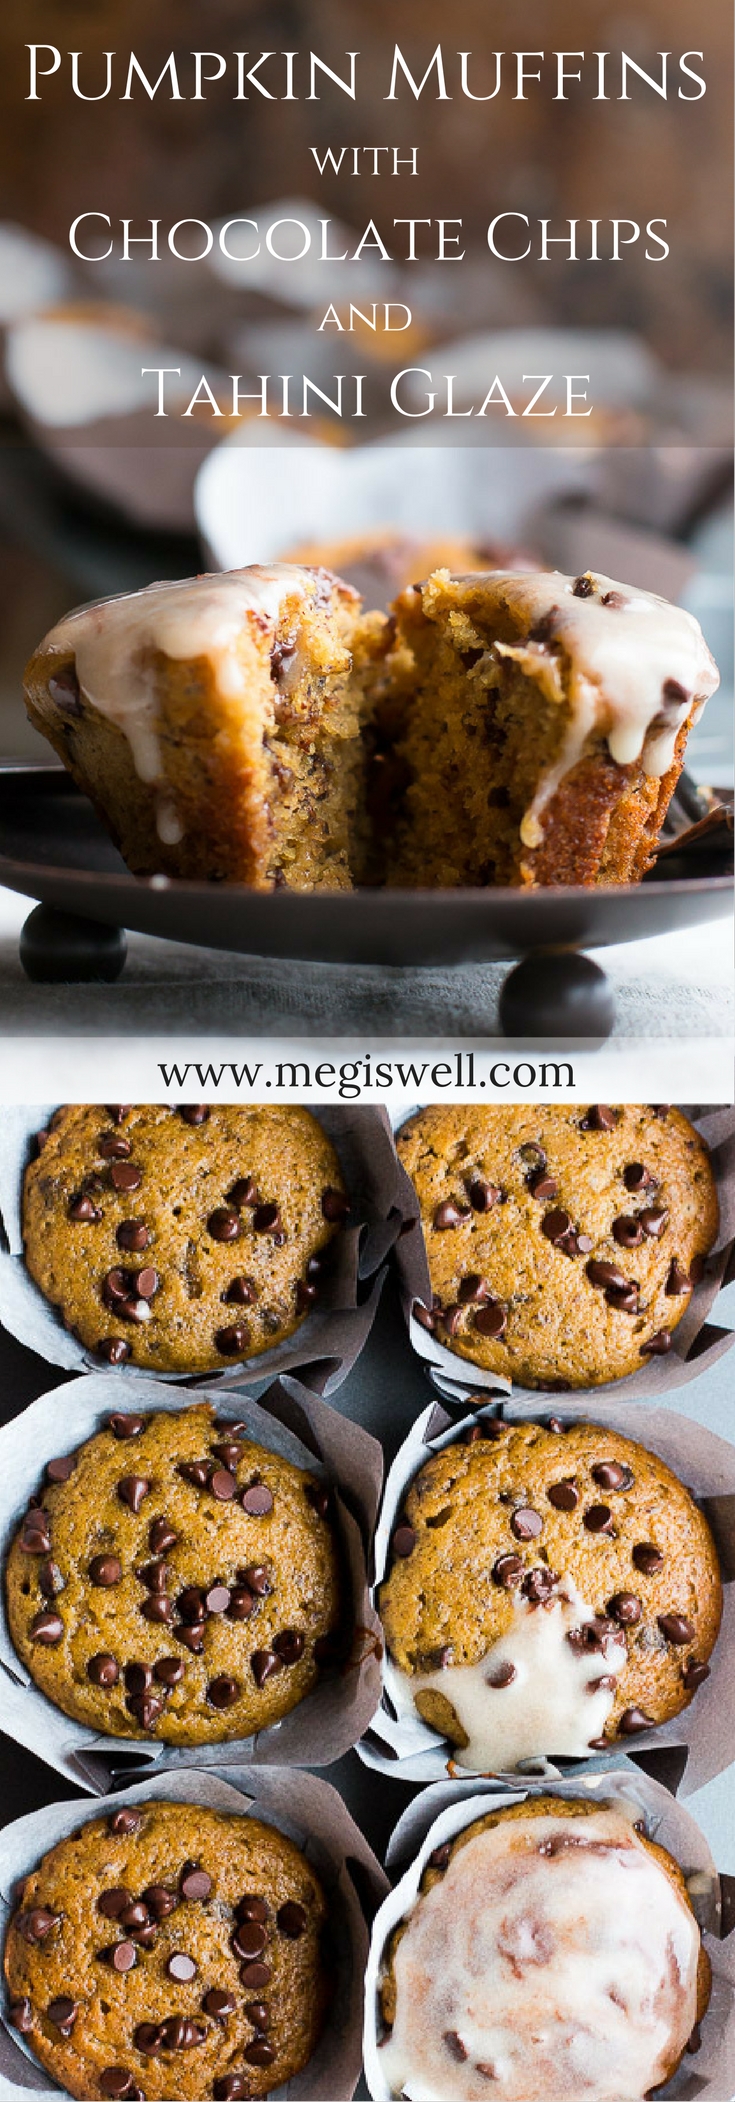 My favorite pumpkin bread recipe gets revamped in these Pumpkin Muffins with Chocolate Chips and Tahini Glaze. The tahini glaze adds a little savory goodness and pairs amazingly with the chocolate chips, creating savory-sweet muffin greatness! | www.megiswell.com